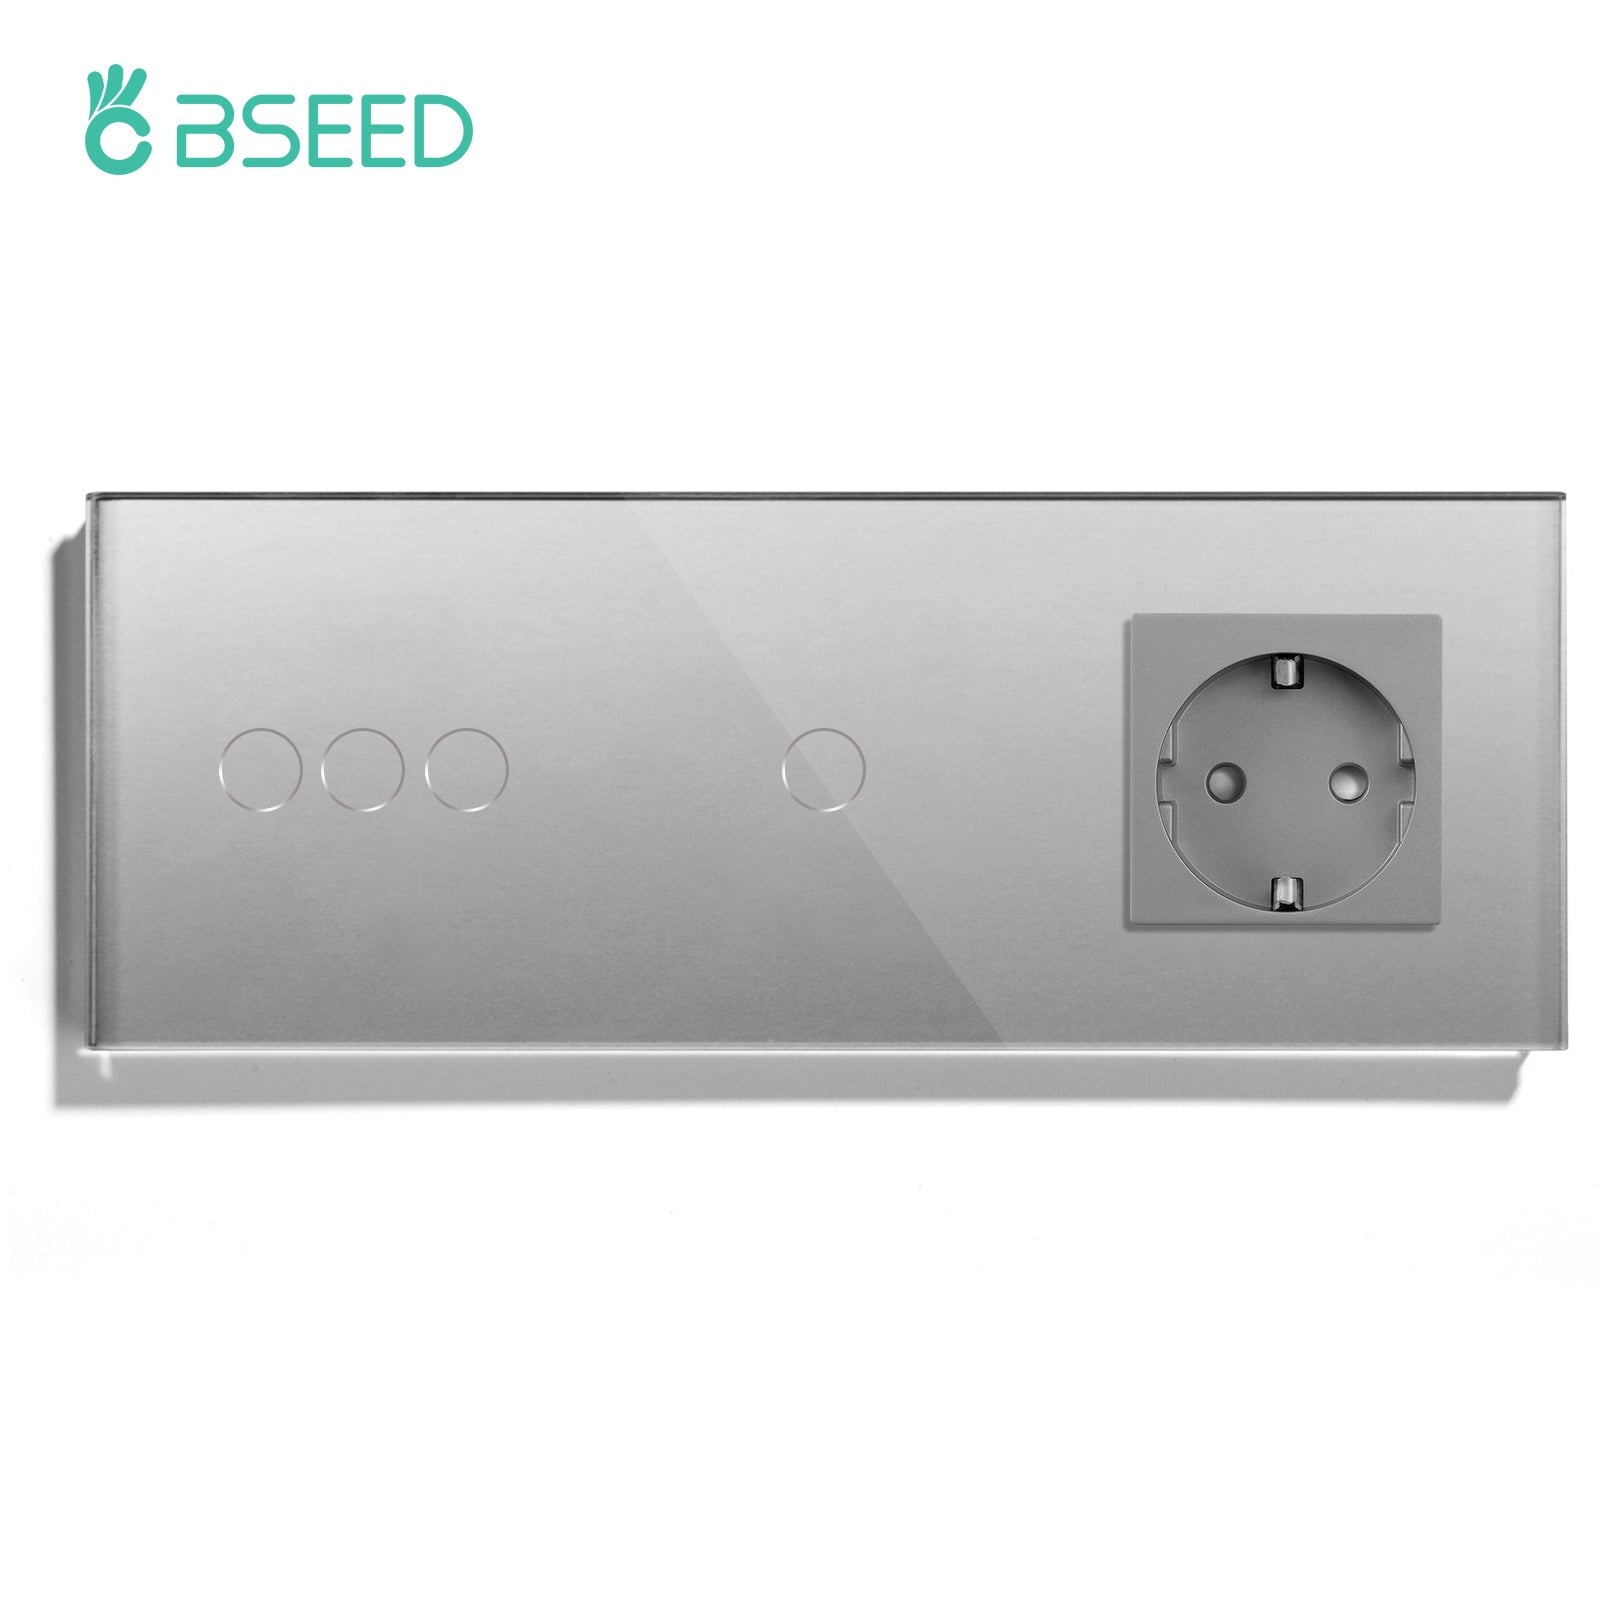 BSEED Double Touch 1/2/3 Gnag 1/2/3 Way Light Switch With EU Socket Power Outlets & Sockets Bseedswitch Grey 3gang+1gang 1Way